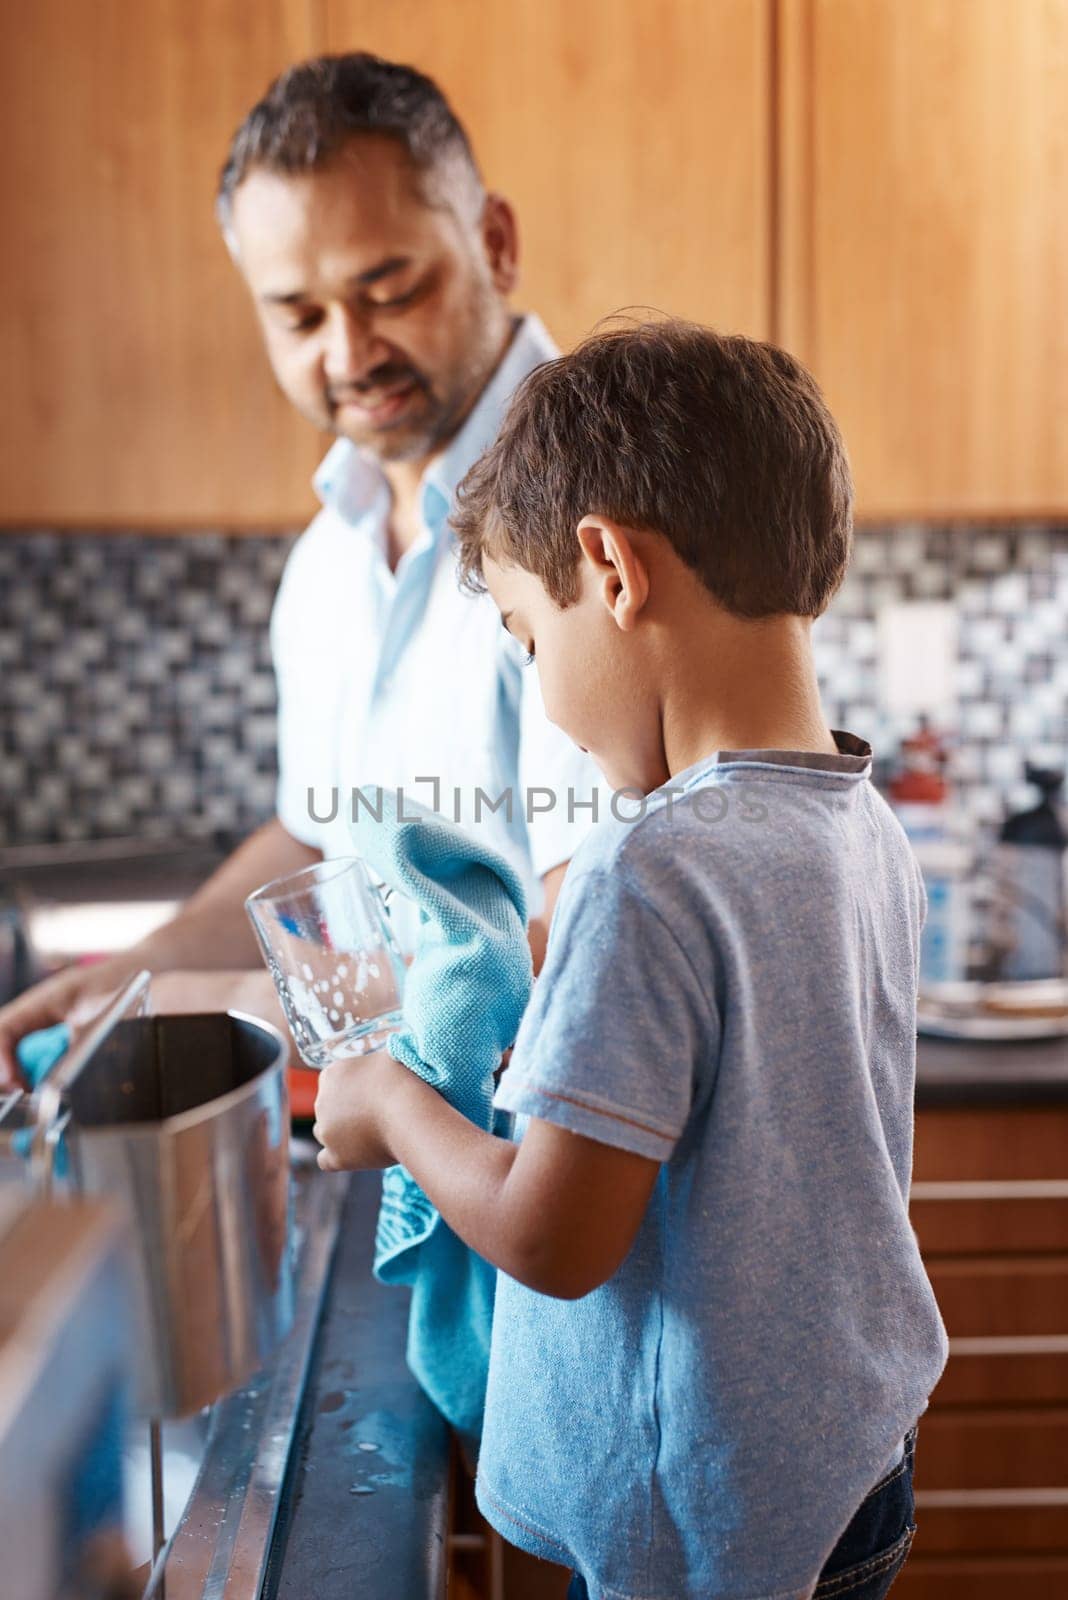 Child, help and father washing dishes in kitchen together for learning housekeeping at home. Teaching, hygiene and dad with boy kid cleaning glasses with cloth for chores and bonding at house